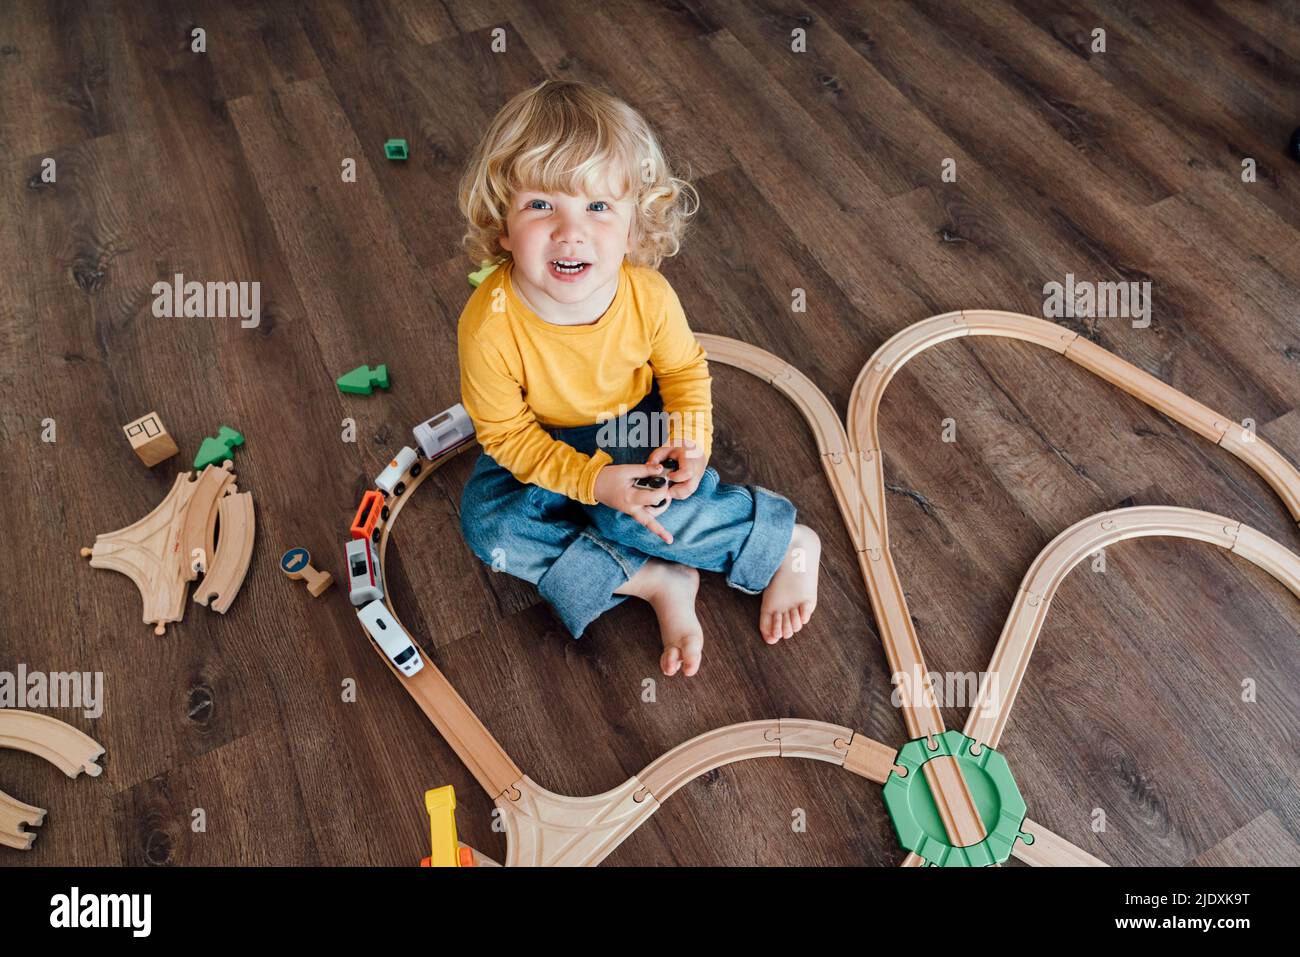 Happy boy with blond hair playing with toy train set at home Stock Photo